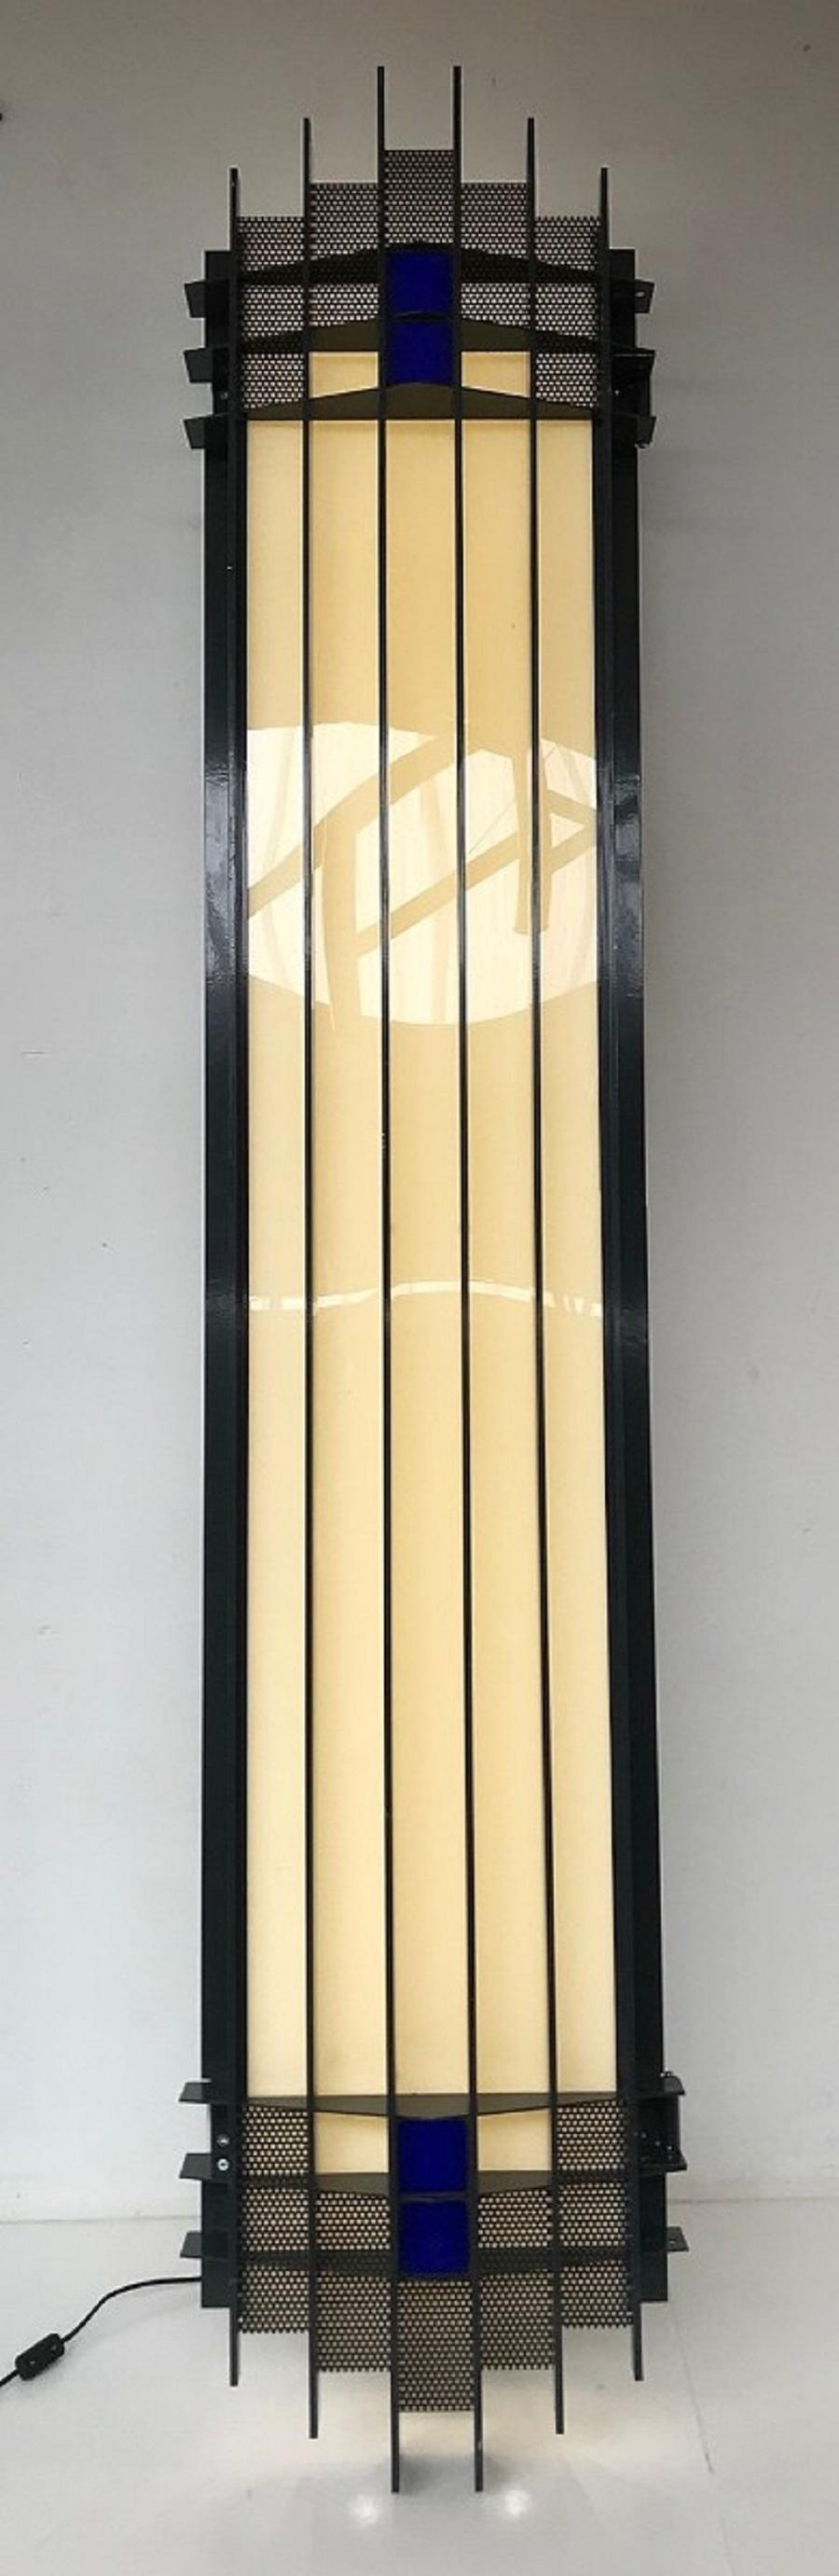 extra large decorative wall sconces